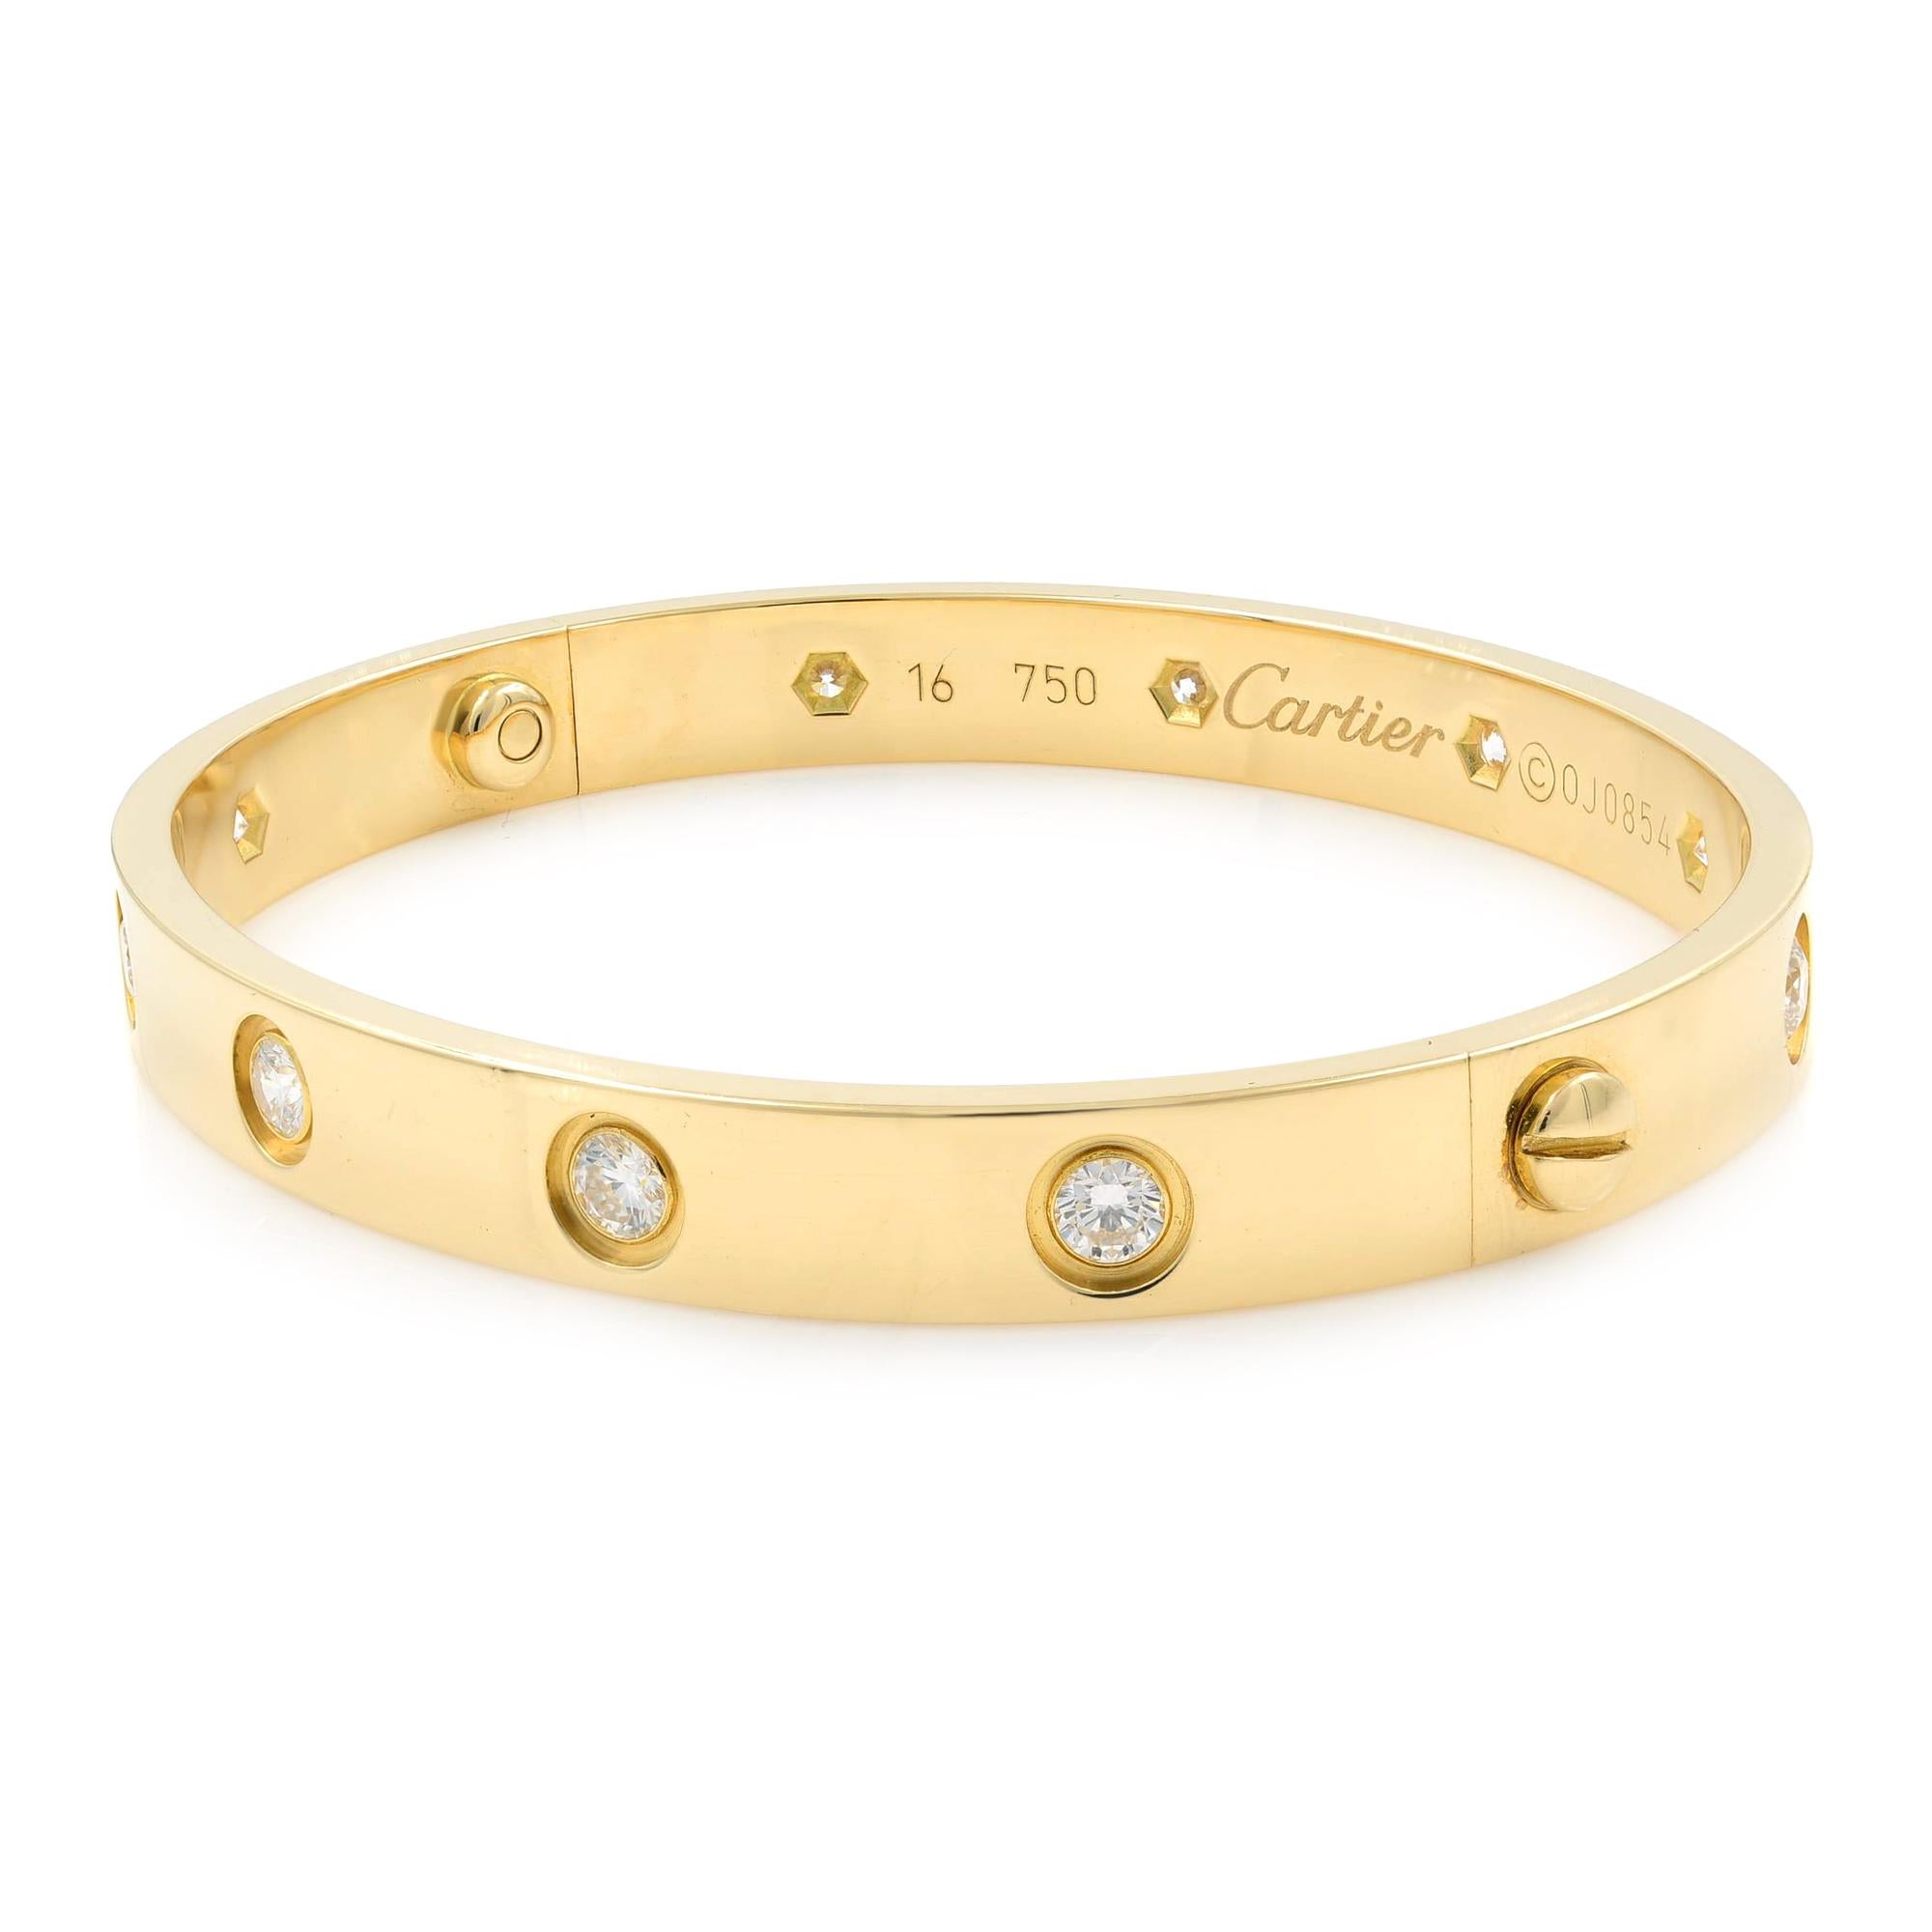 How far would you go for love? This is the question posed by Cartier with its now-iconic piece, the LOVE bracelet. Its appeal is multifaceted -- a cult item beloved by the fashion set, celebrity favorite and classic piece with instant recognition,